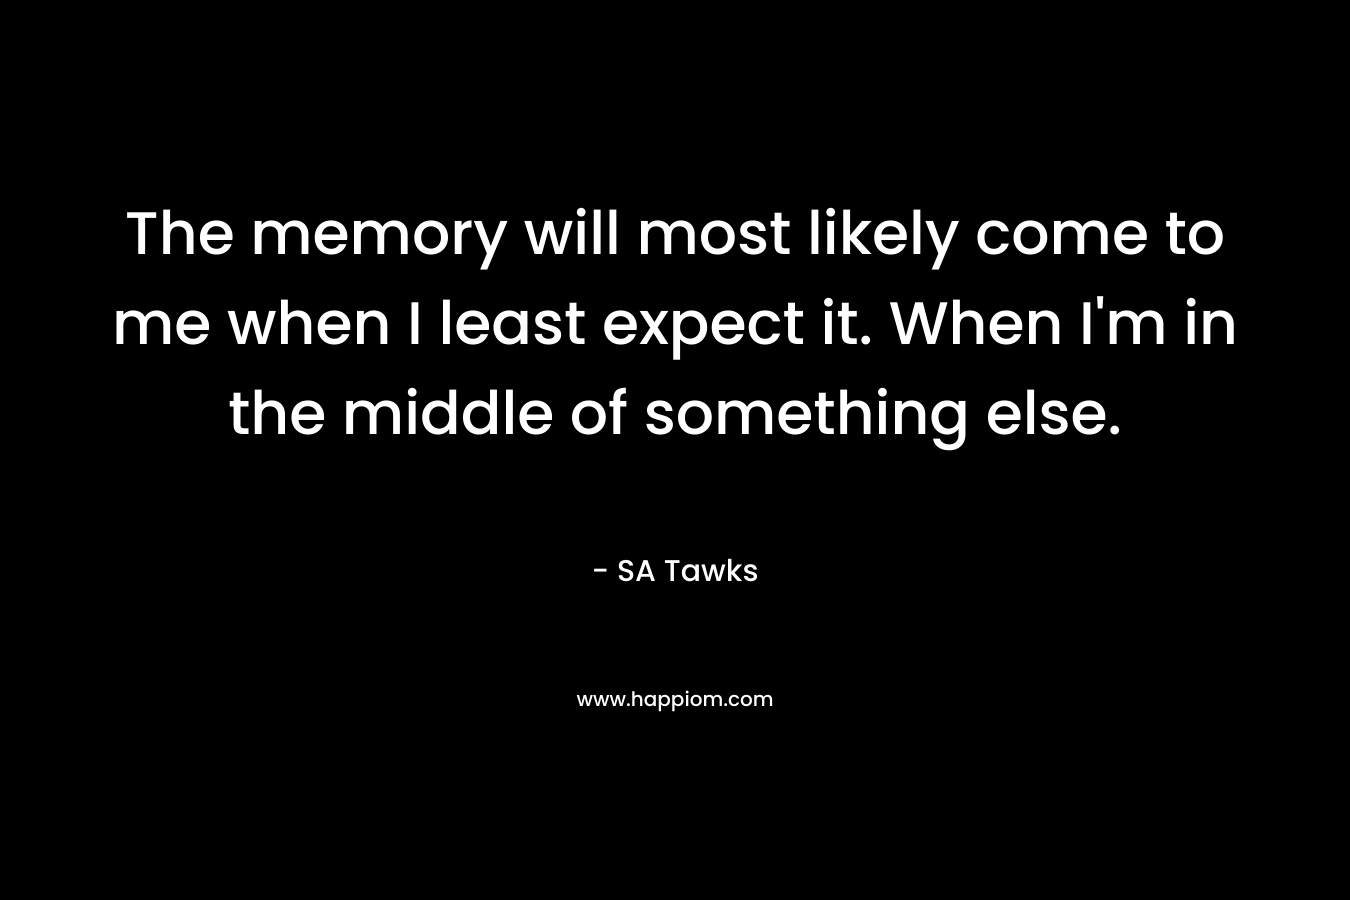 The memory will most likely come to me when I least expect it. When I'm in the middle of something else.